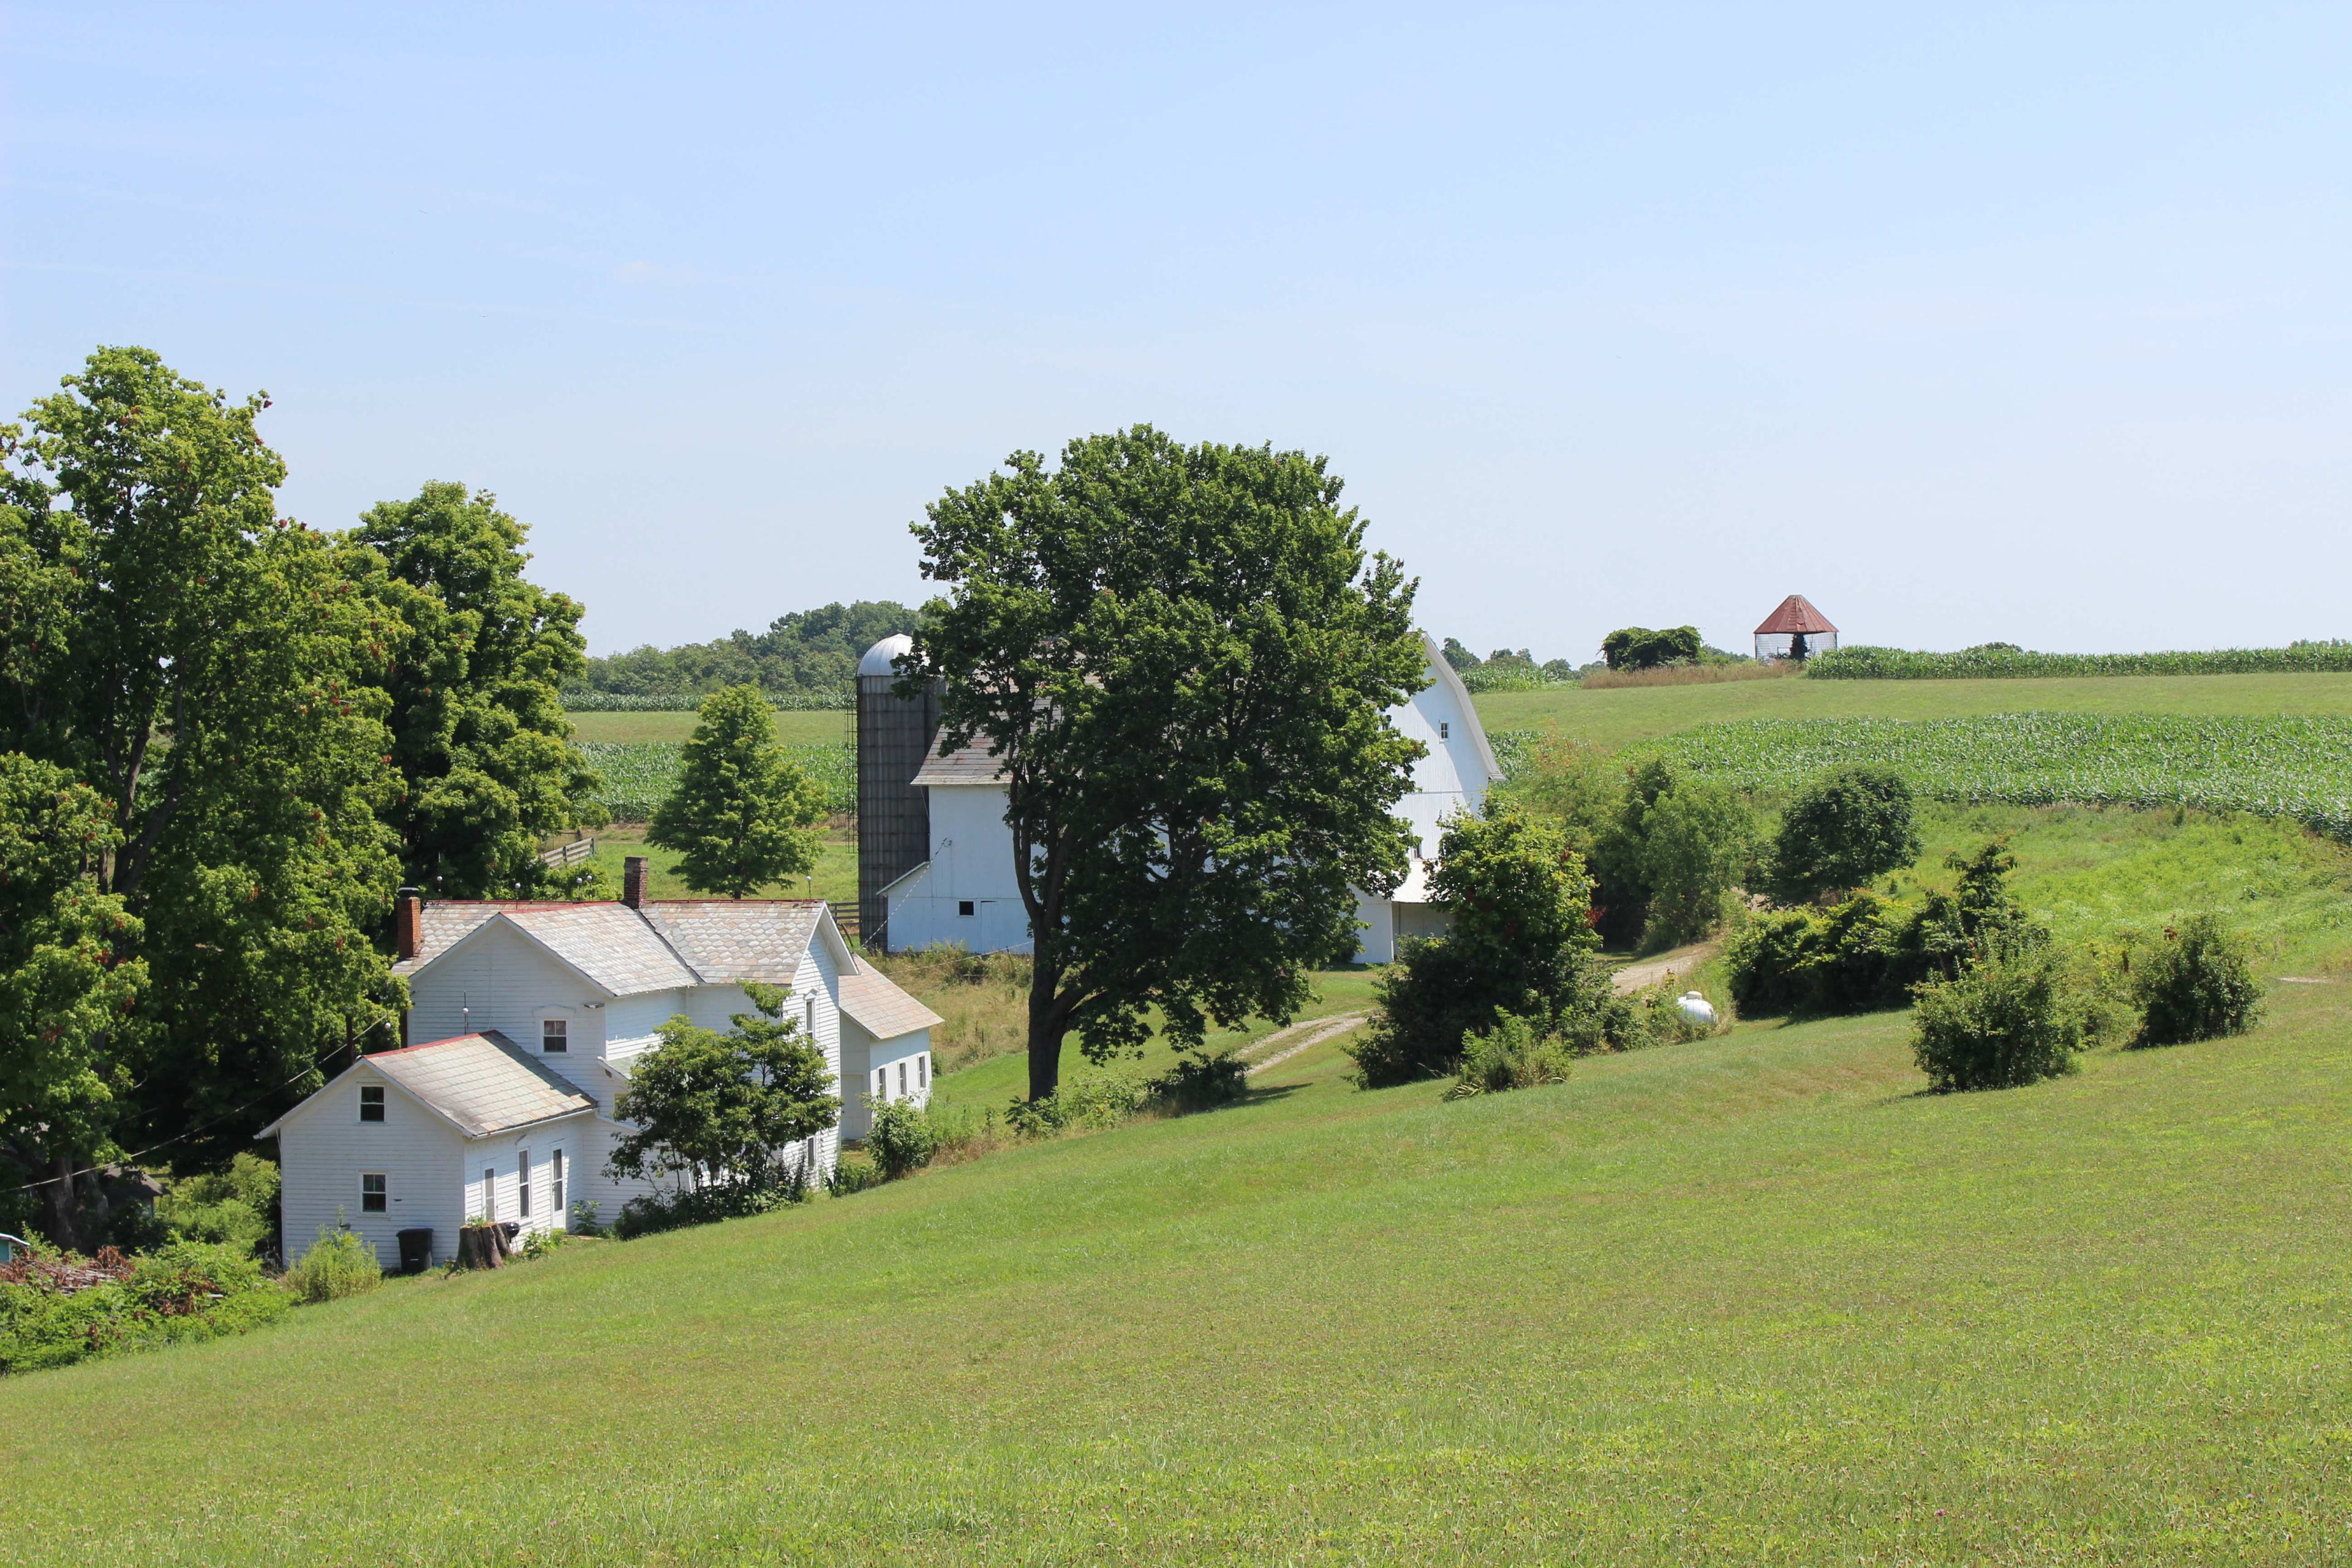 The McKee Farmhouse is nestled in the heart of a 230+ acre farm